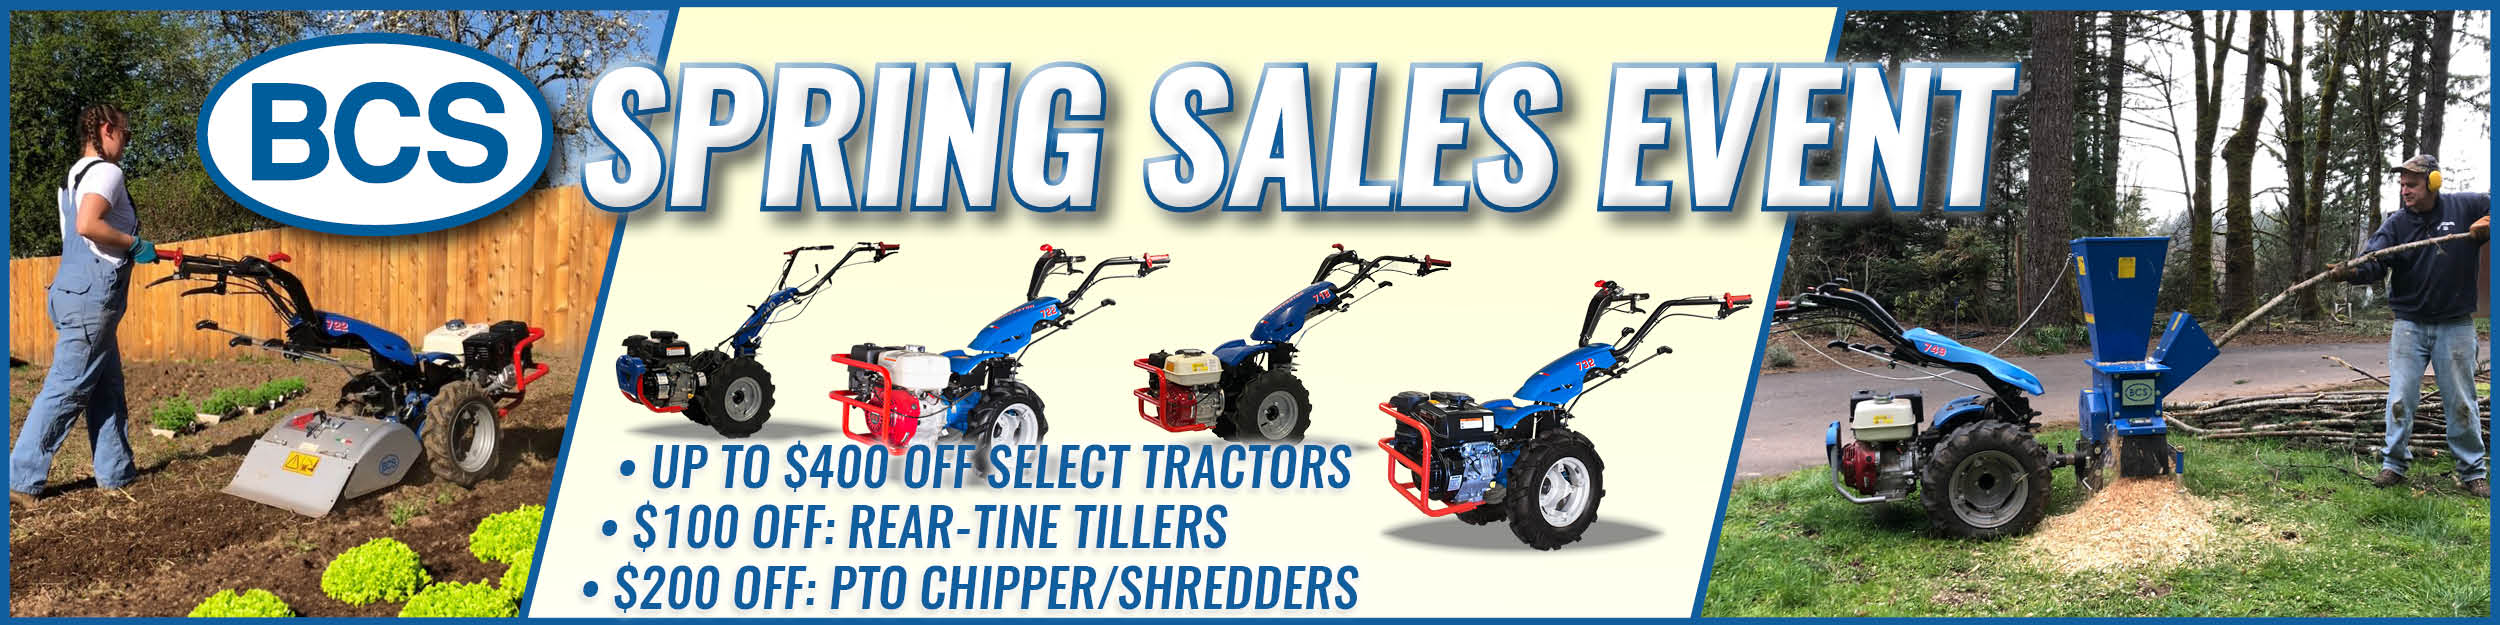 Spring Sale: Save BIG on Tractors, Tillers and Chippers!